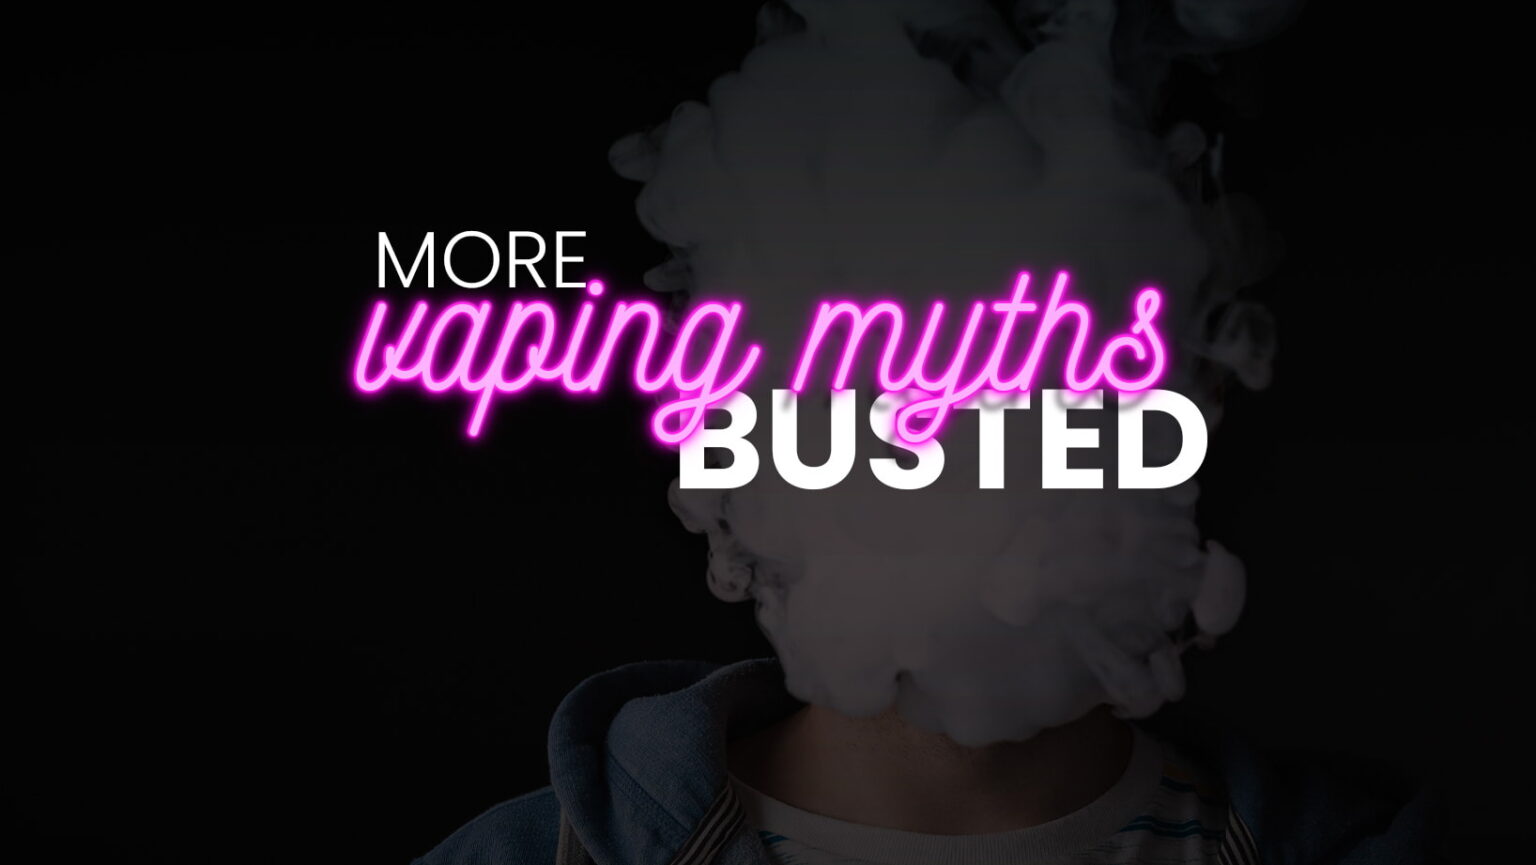 More Vaping Myths Busted.Some more outrageous vaping claims debunked.